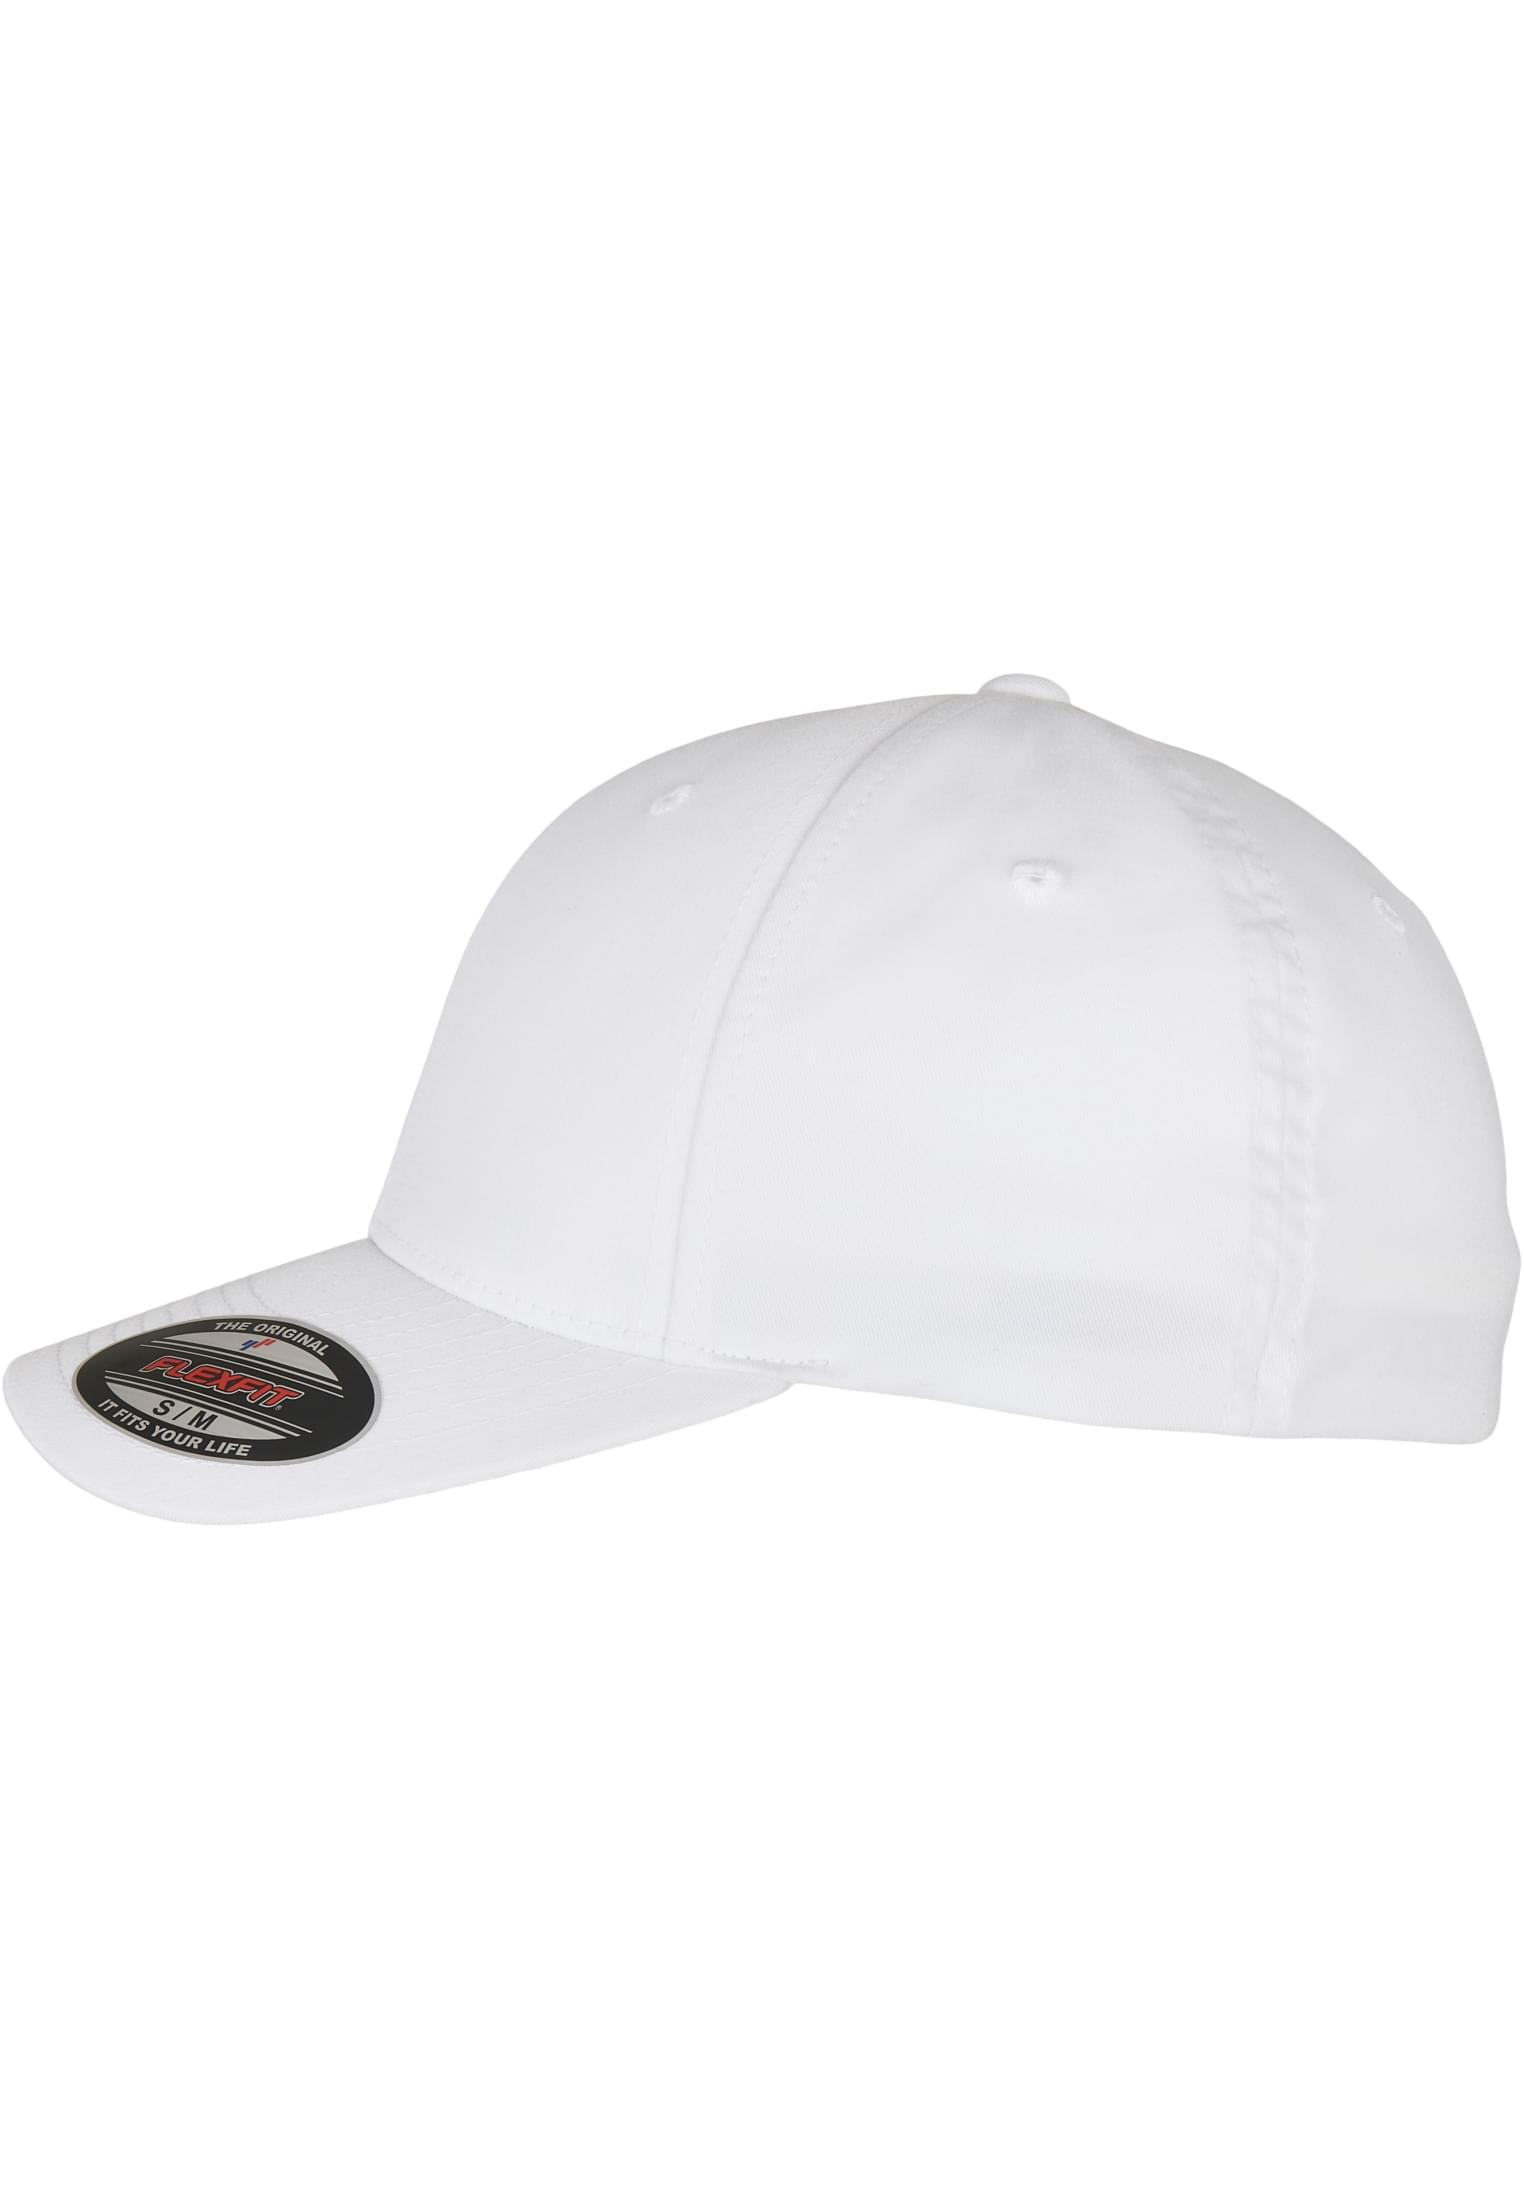 Cap-6277RP Recycled Flexfit Polyester